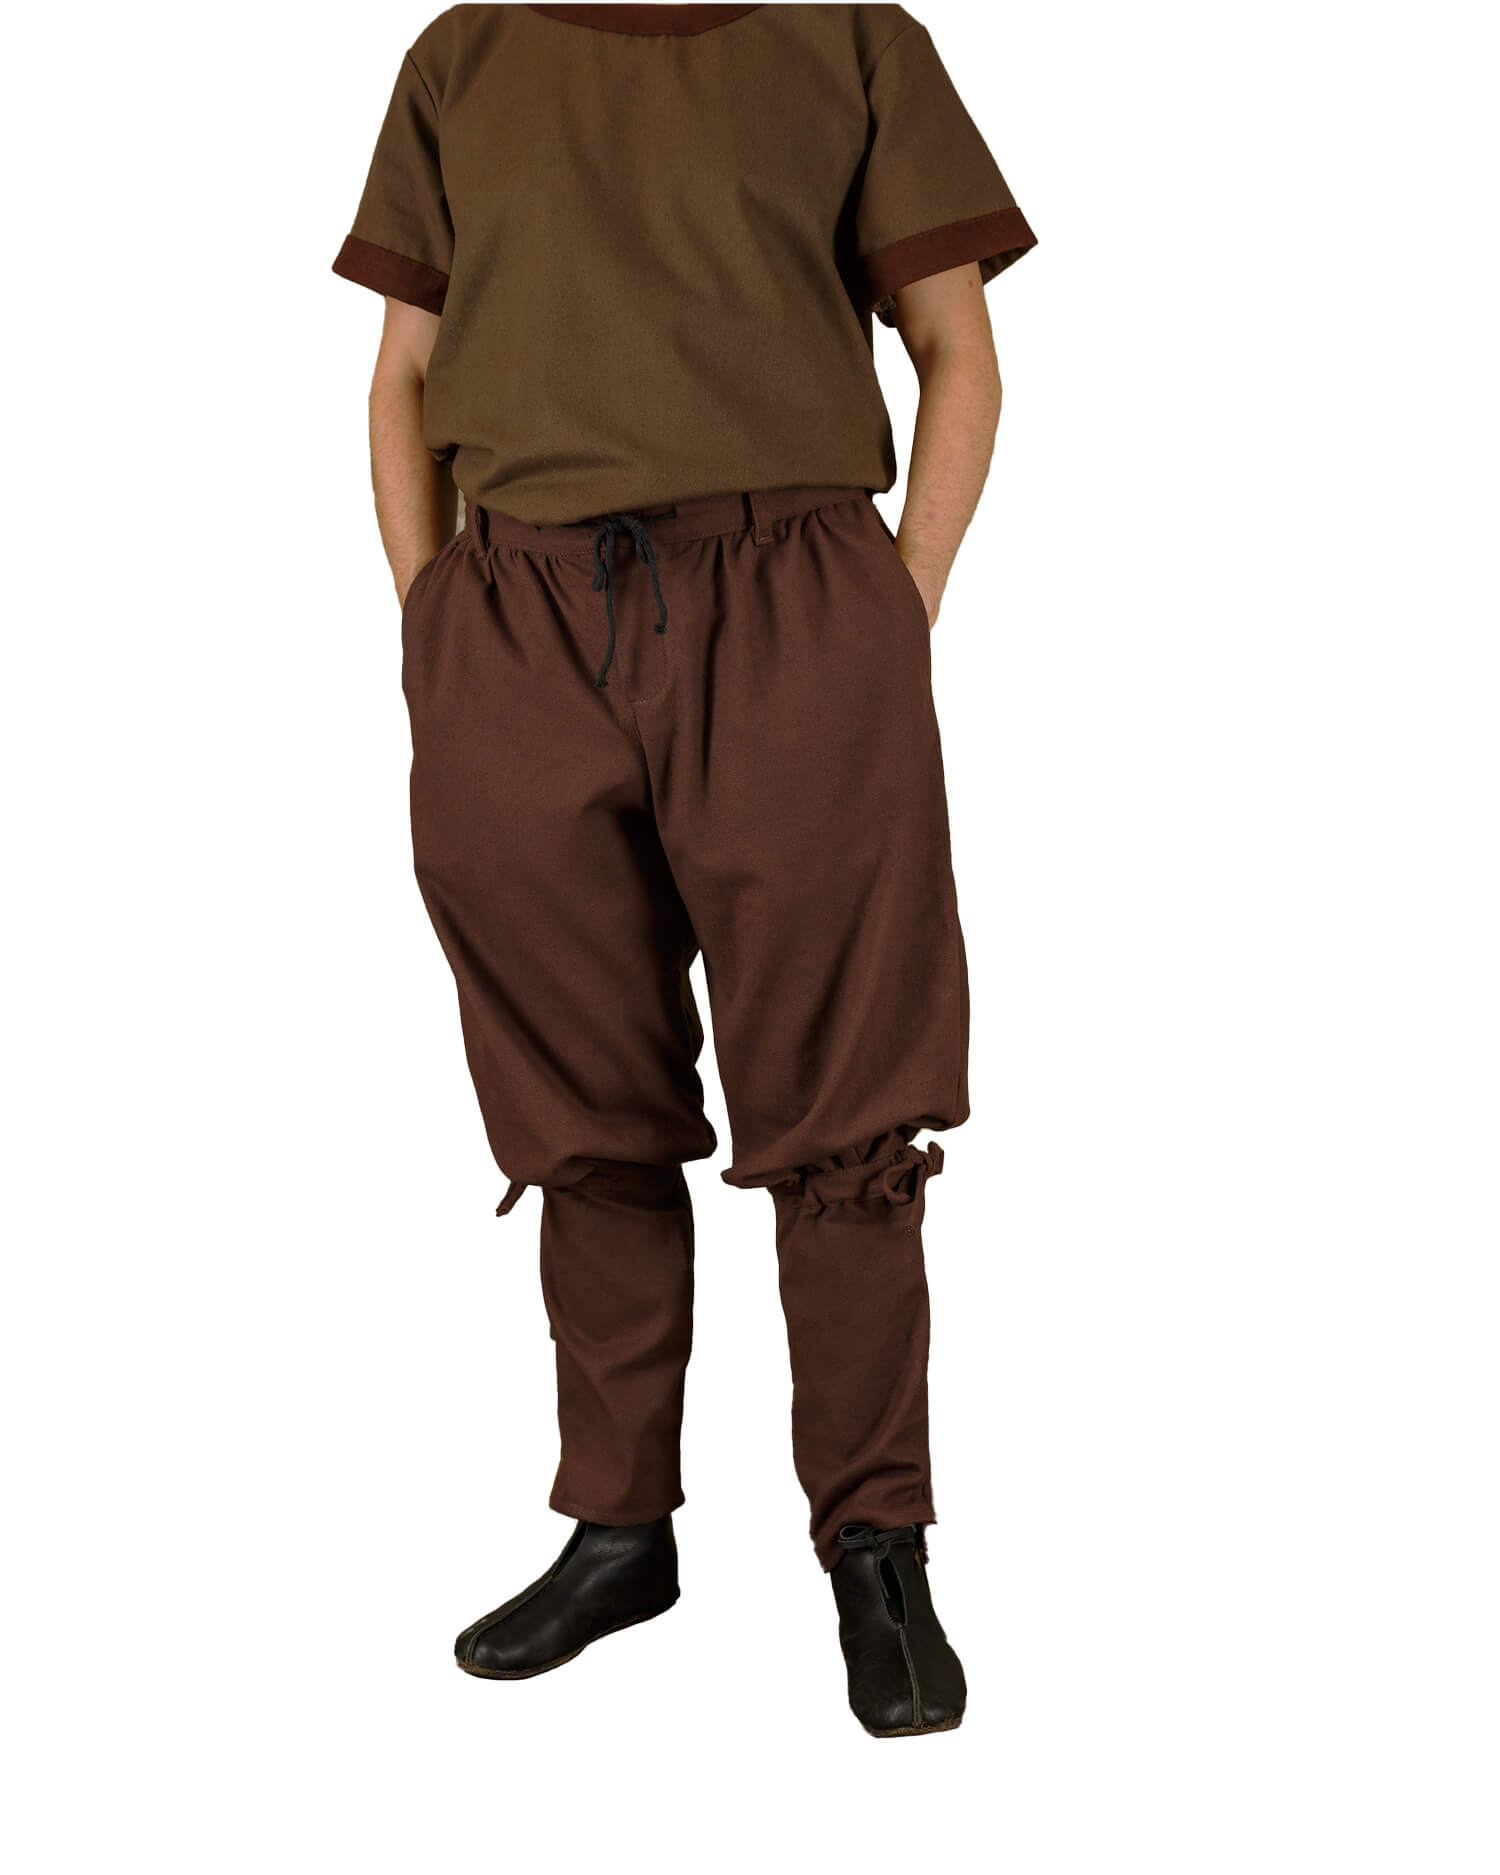 Ketill Canvas Pants Cuffed Medieval Trousers